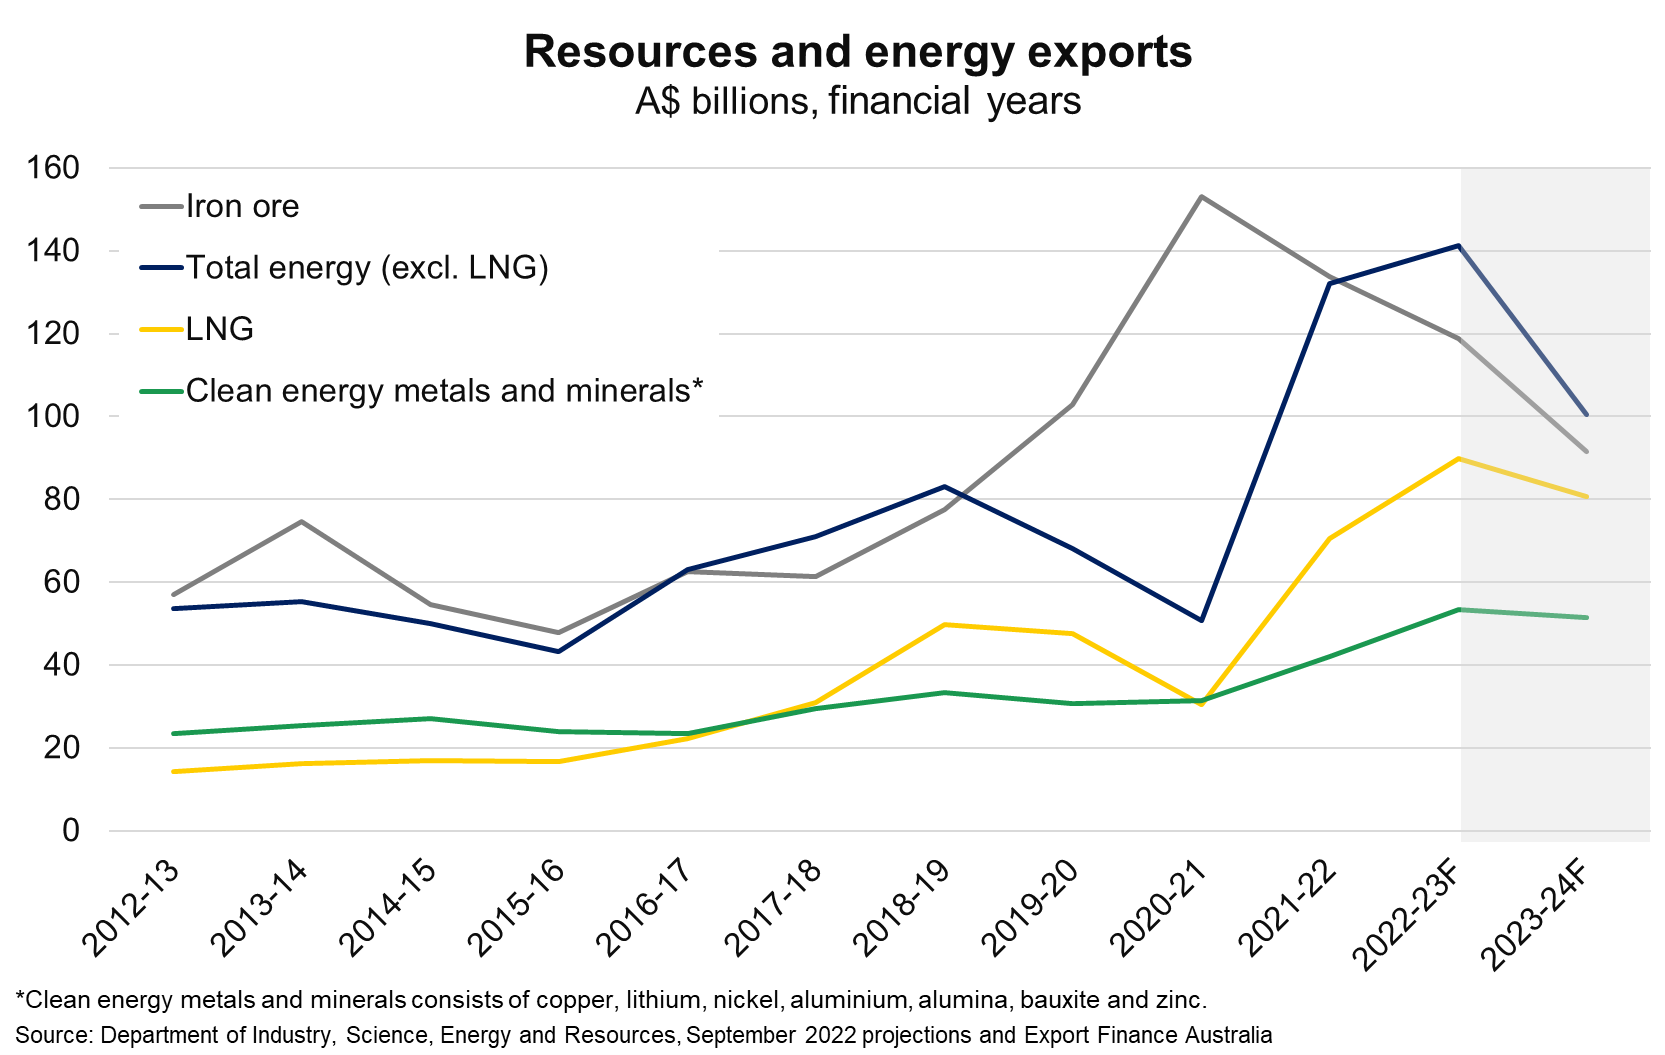 Declining exports of iron ore by value will be offset by rising exports of LNG, metals and minerals.